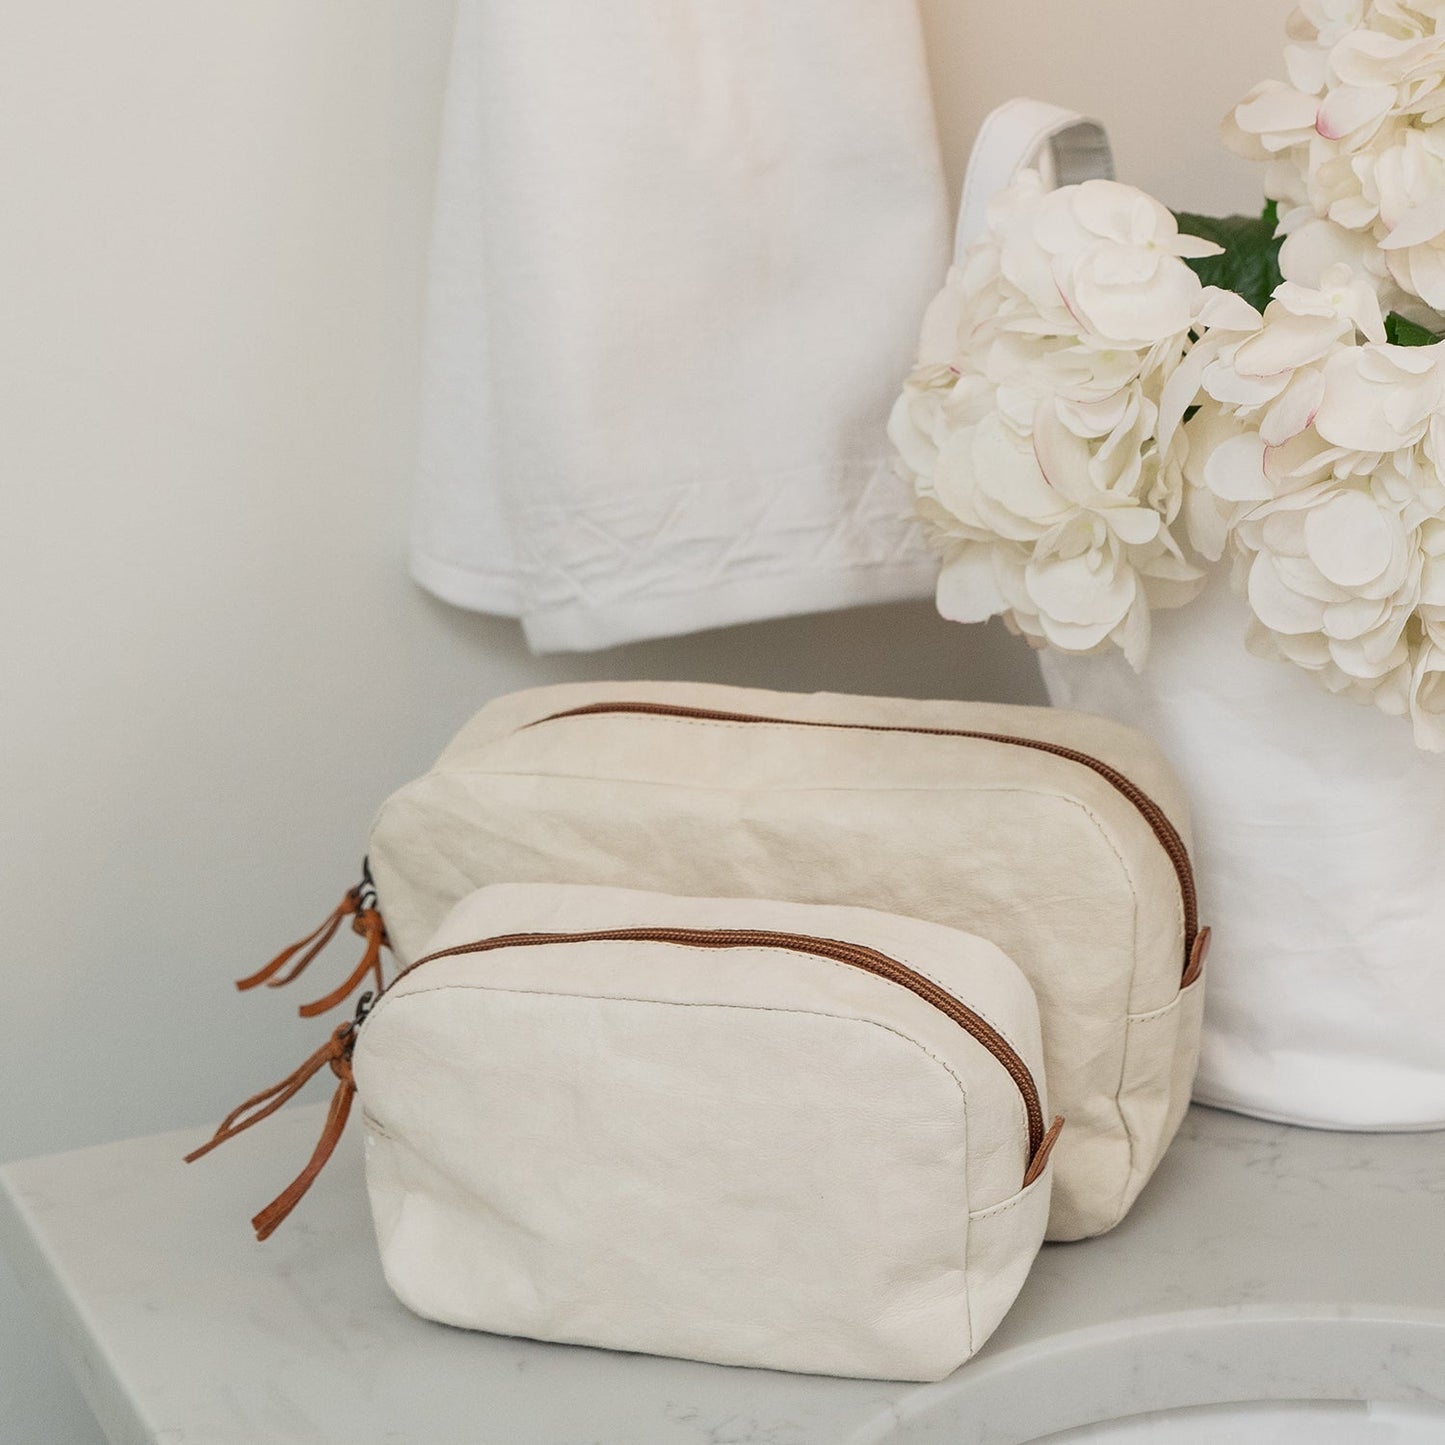 The image shows two white washable paper toiletery bags, in medium and large. The bags are closed and are sitting in front of a white washable paper bucket containing white flowers. Hanging on the wall is a white towel.